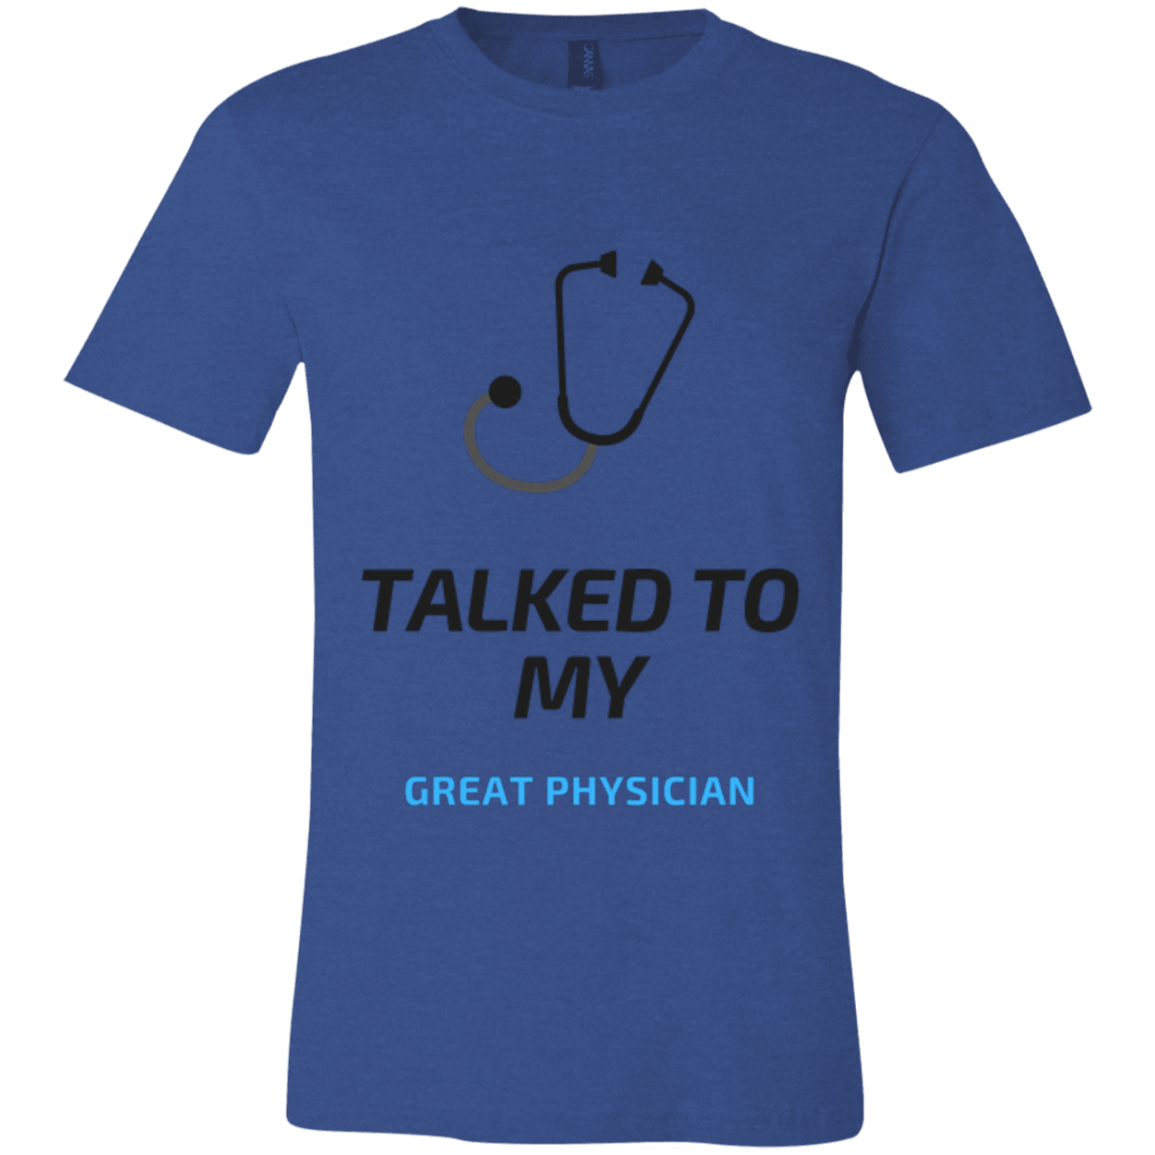 Great Physician Tee